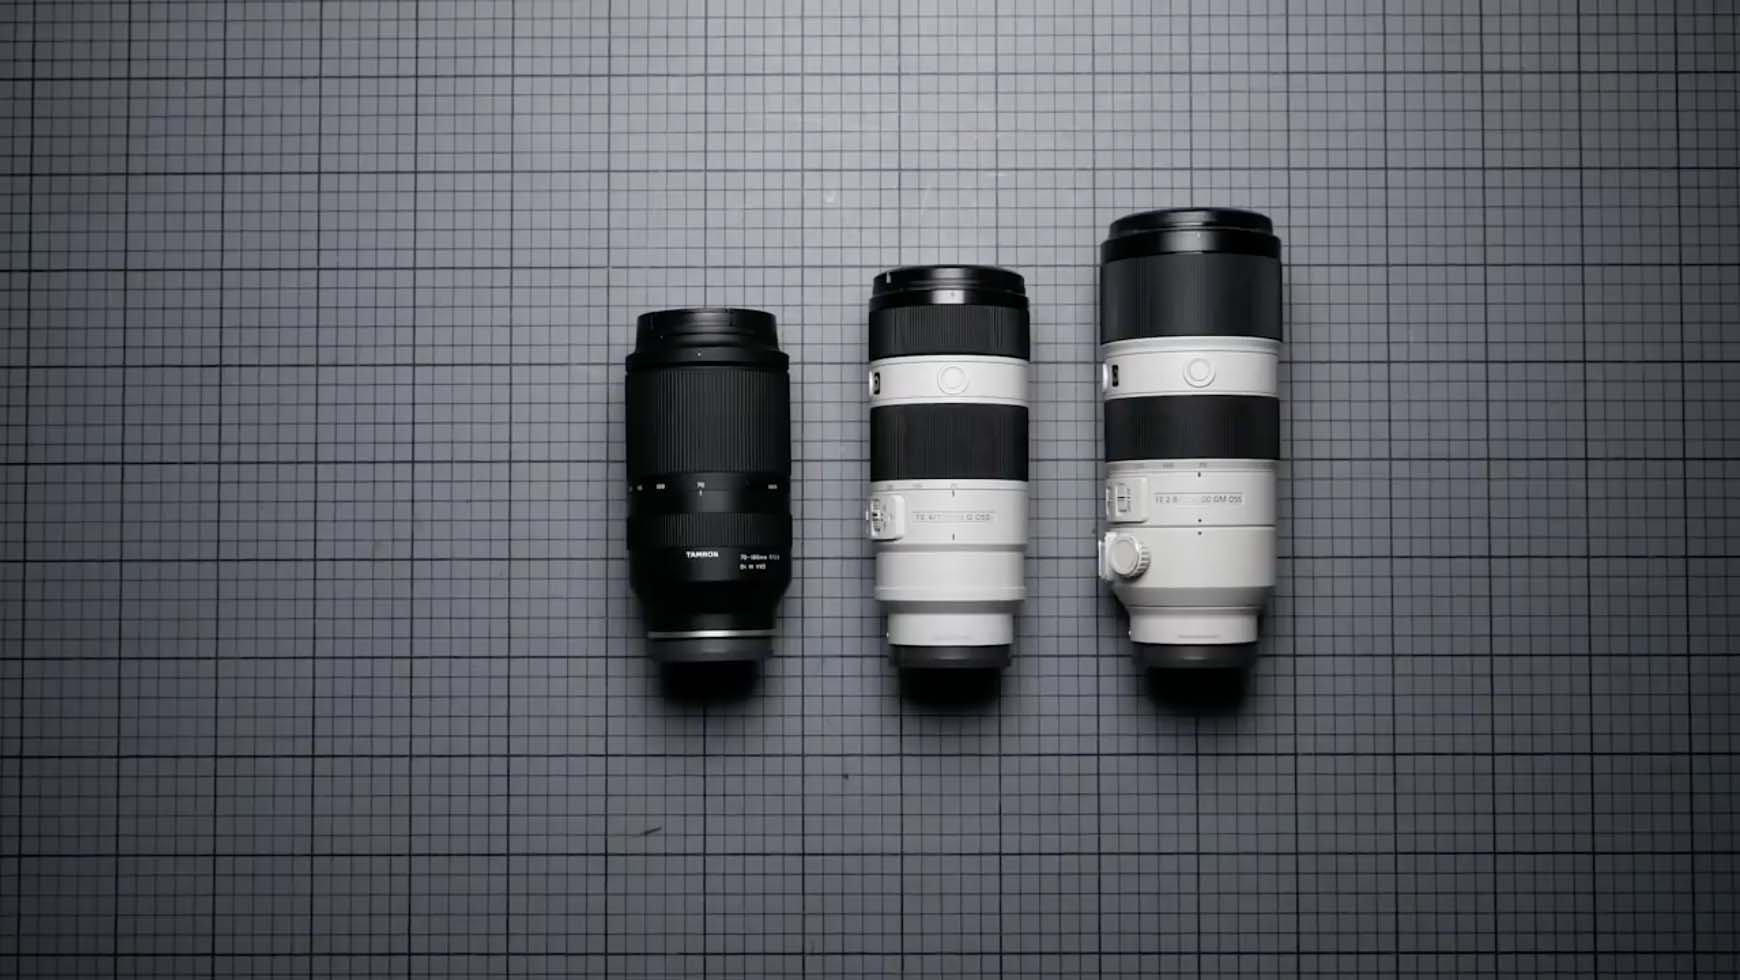 Tamron 70-180 f/2.8, Sony 70-200mm f/2.8, and Sony 70-200mm f/4 Size Comparison